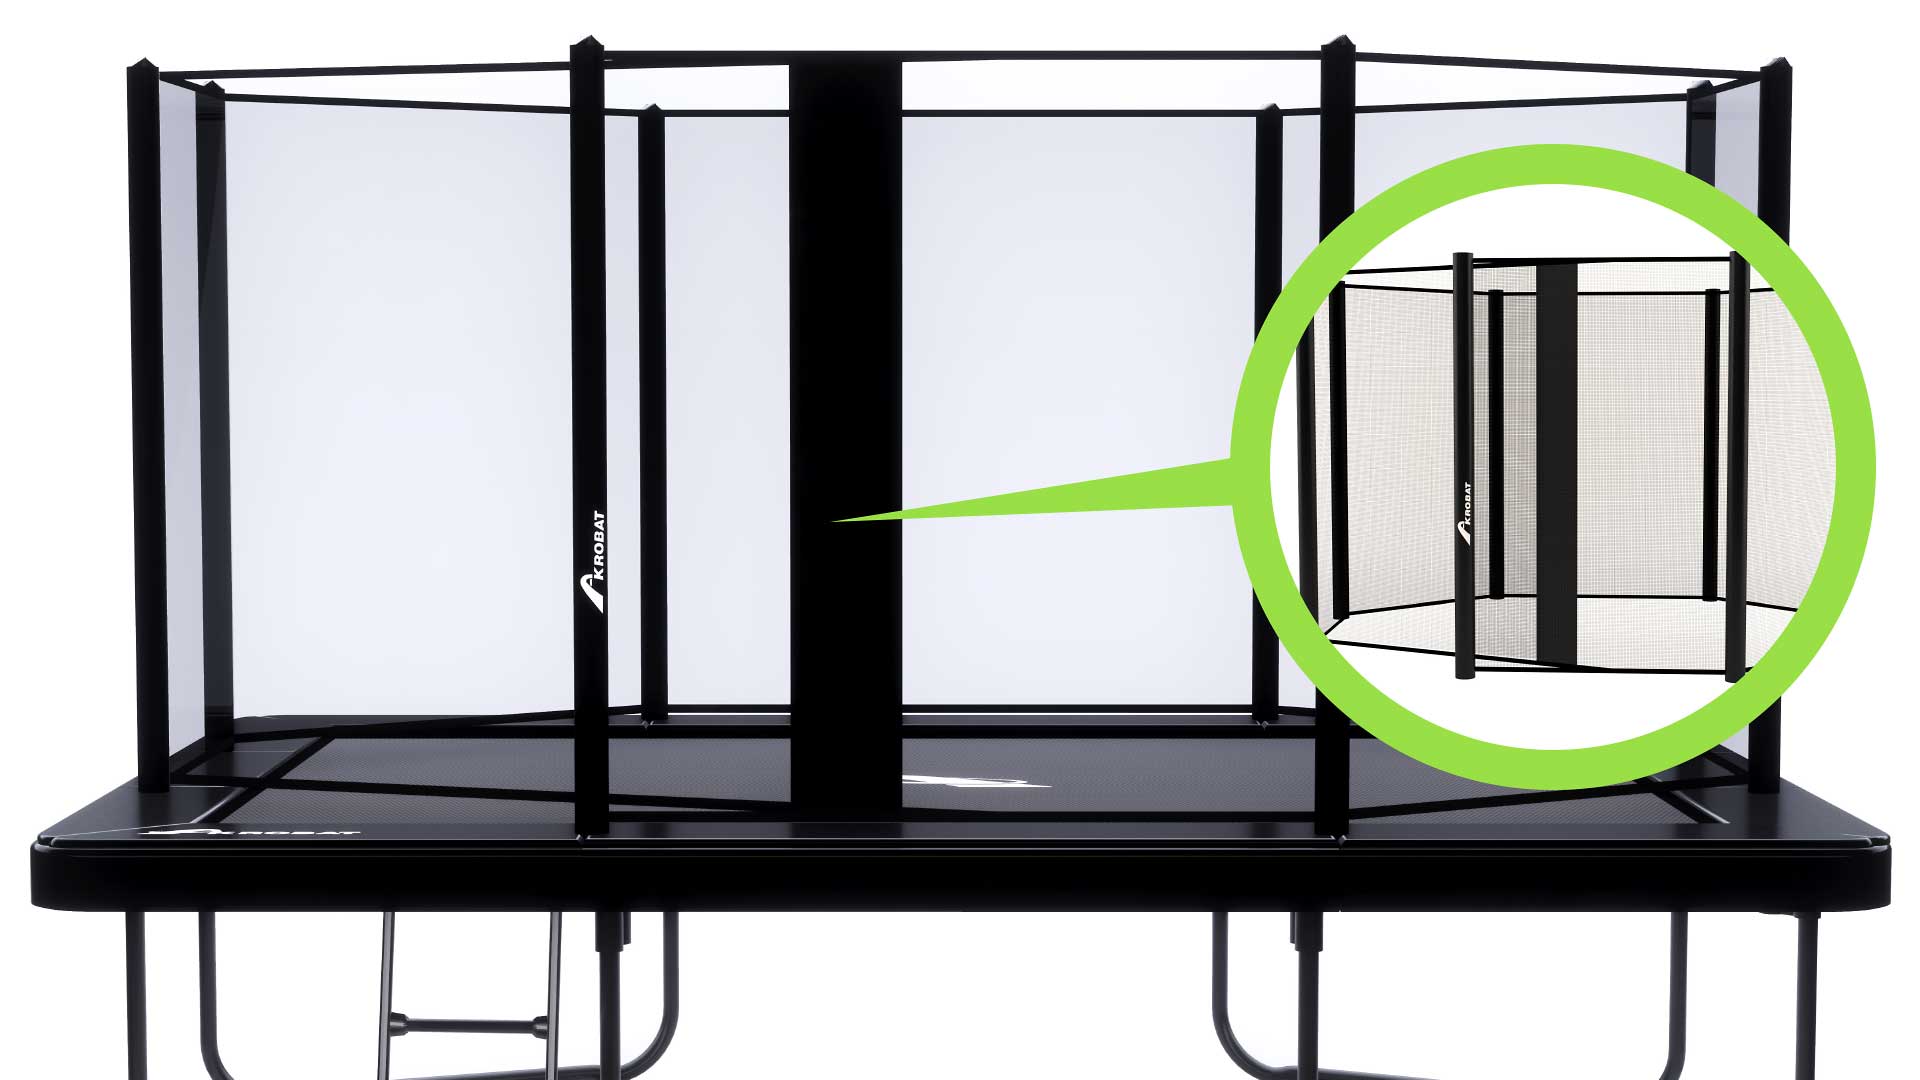 Akrobat Primus Challenger Trampoline with overlapping entrance